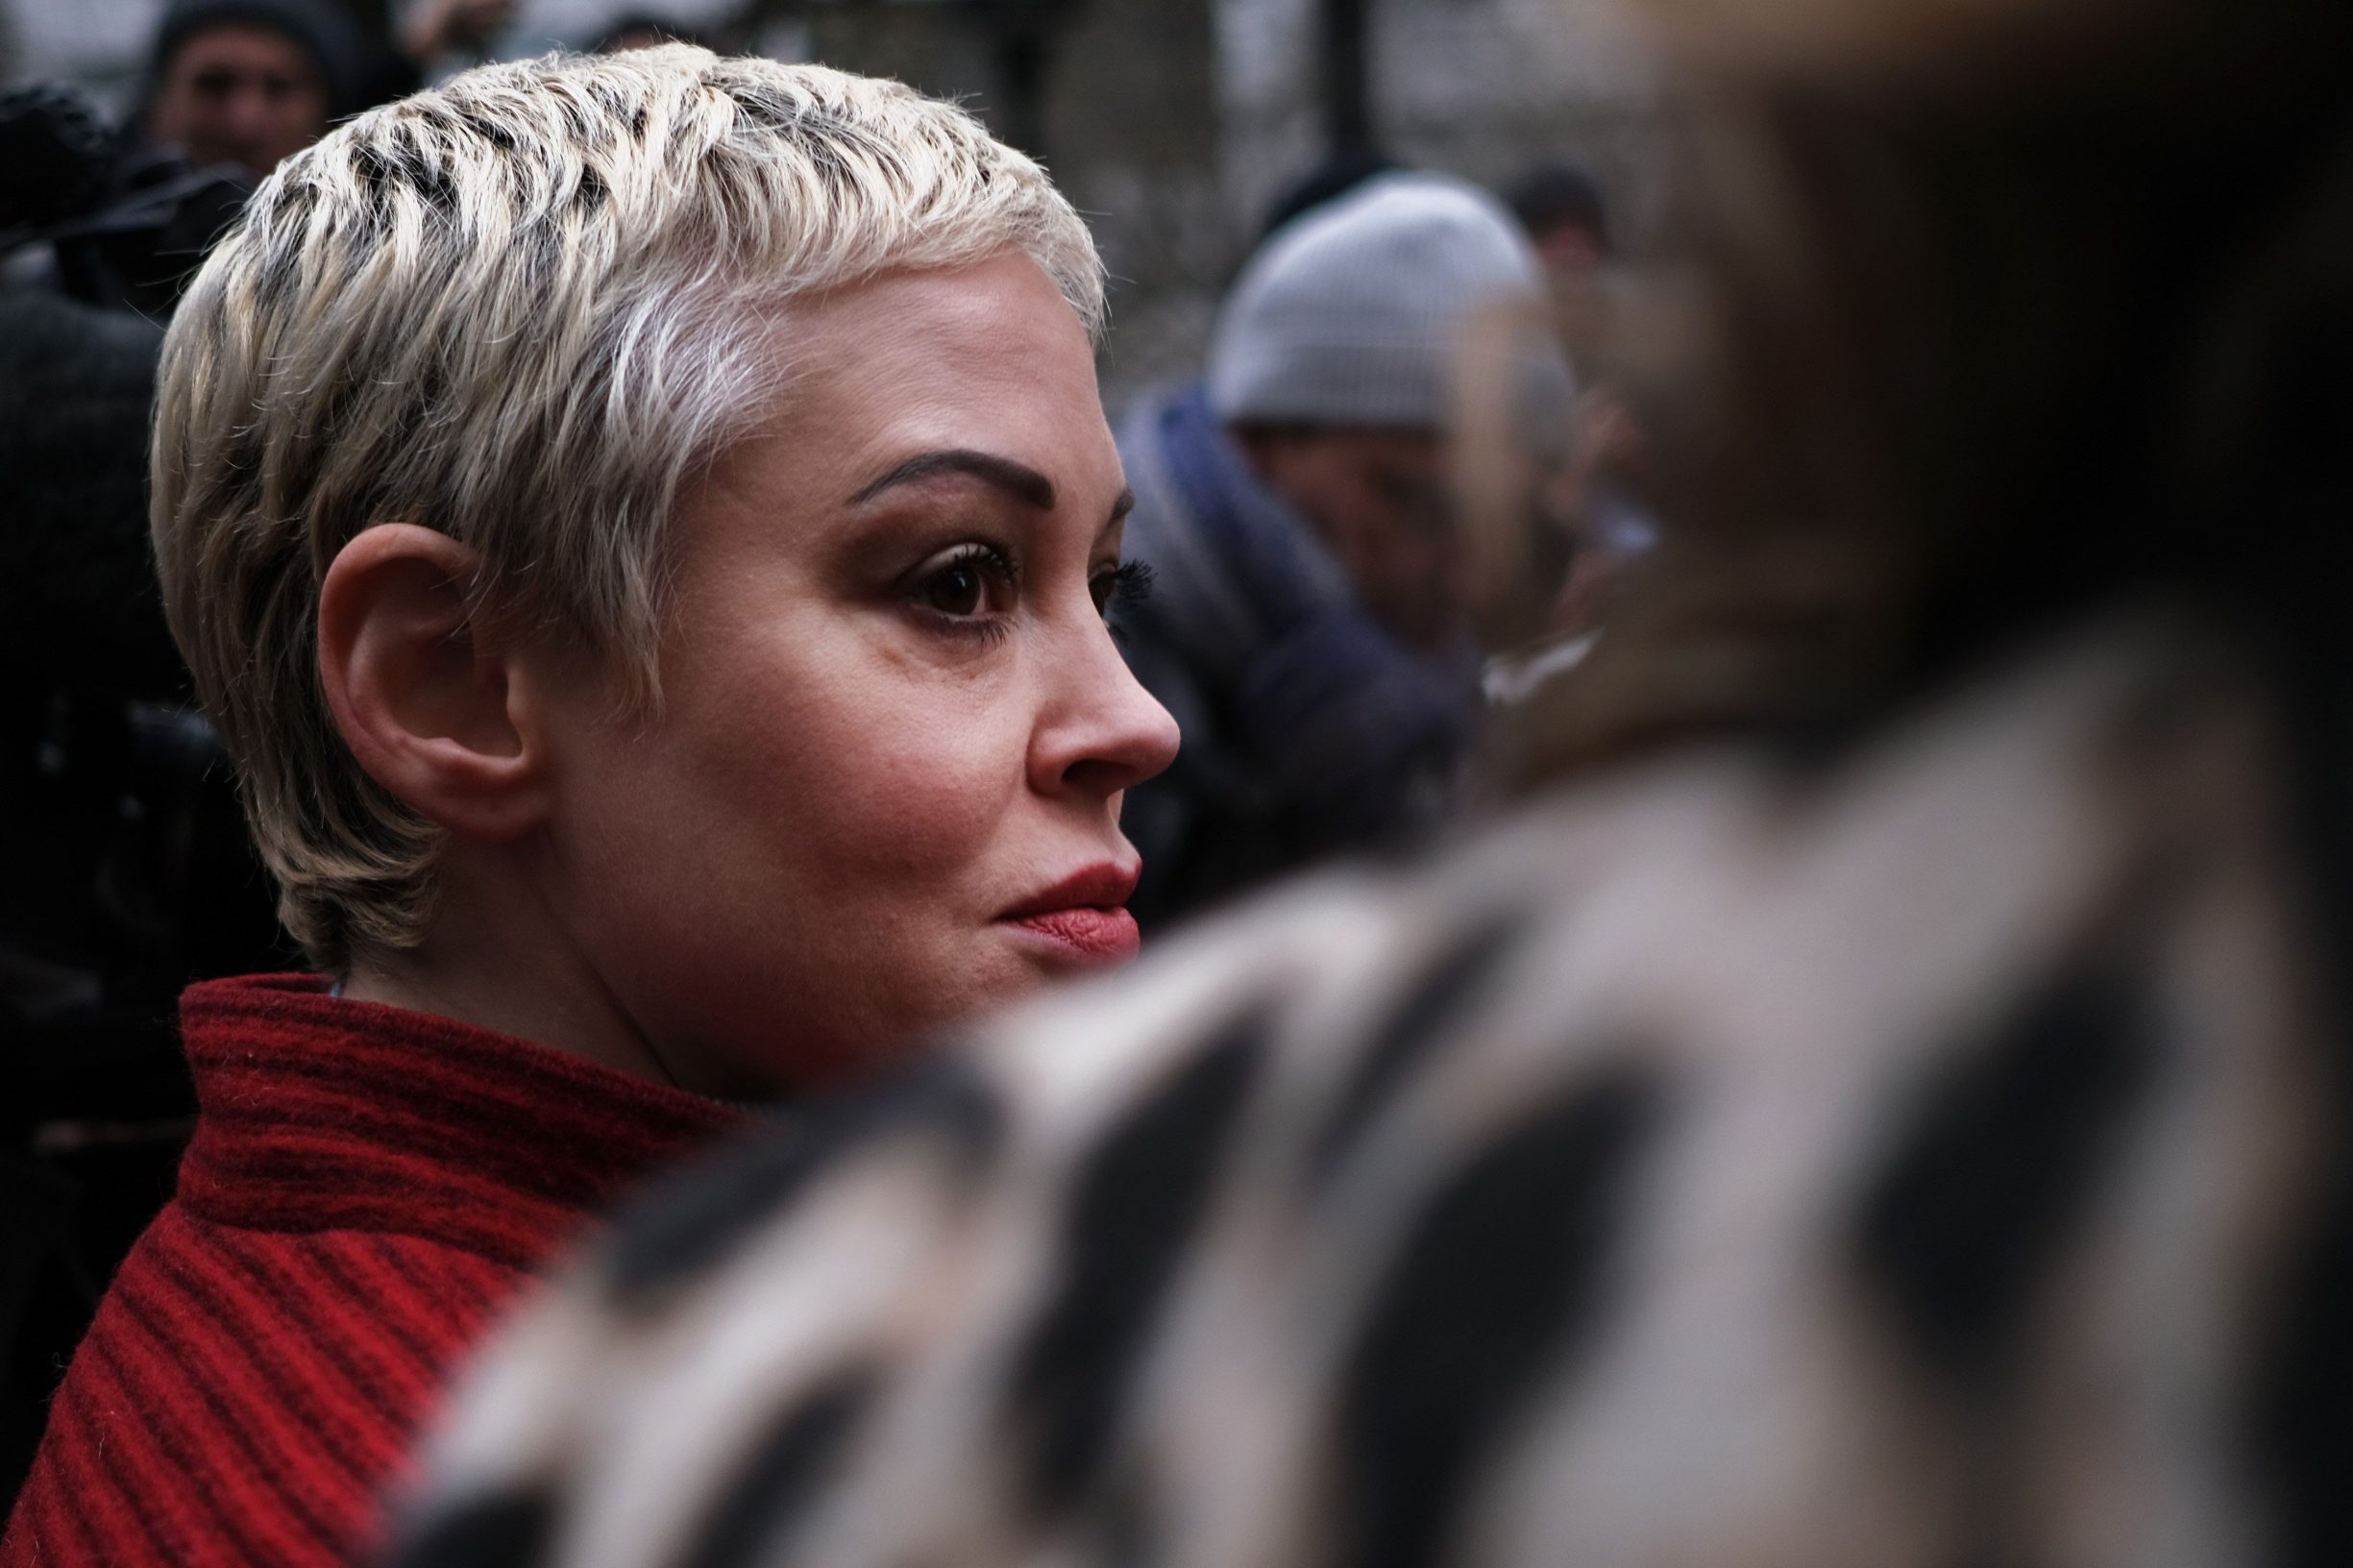 NEW YORK, NEW YORK - JANUARY 06: Actress Rose McGowan, who accused Weinstein of raping her more two two decades ago and then of destroying her career, joins other accusers and protesters as Harvey Weinstein arrives at a Manhattan court house for the start of his trial on January 06, 2020 in New York City. Weinstein, a movie producer whose alleged sexual misconduct helped spark the #MeToo movement, pleaded not-guilty on five counts of rape and sexual assault against two unnamed women and faces a possible life sentence in prison.   Spencer Platt/Getty Images/AFP
== FOR NEWSPAPERS, INTERNET, TELCOS & TELEVISION USE ONLY ==